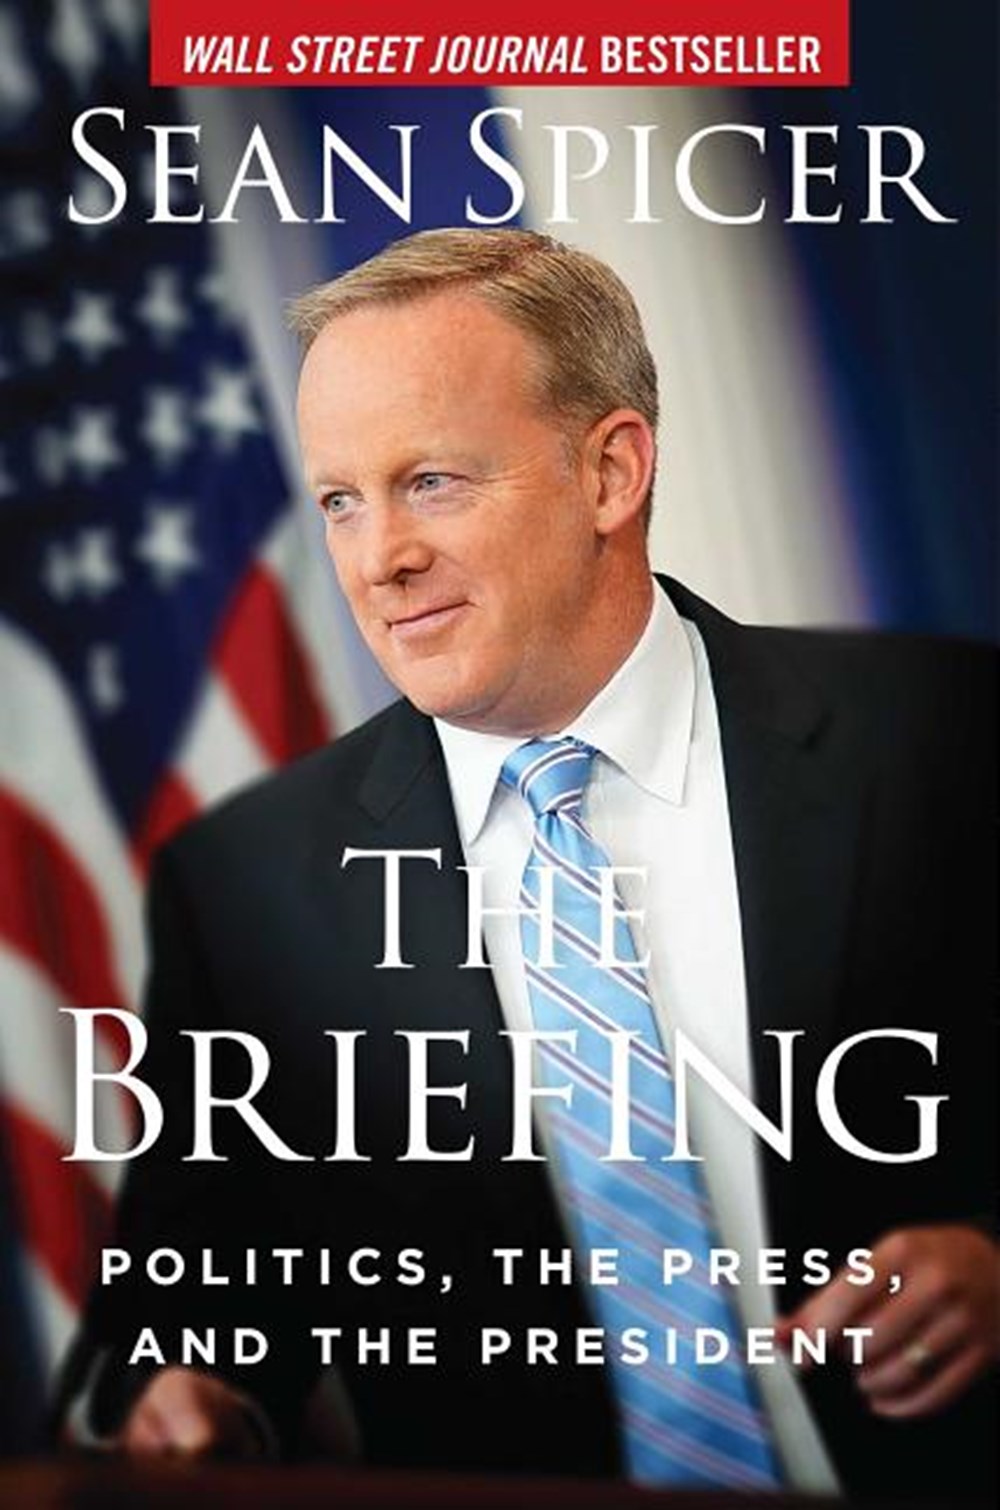 Briefing: Politics, the Press, and the President